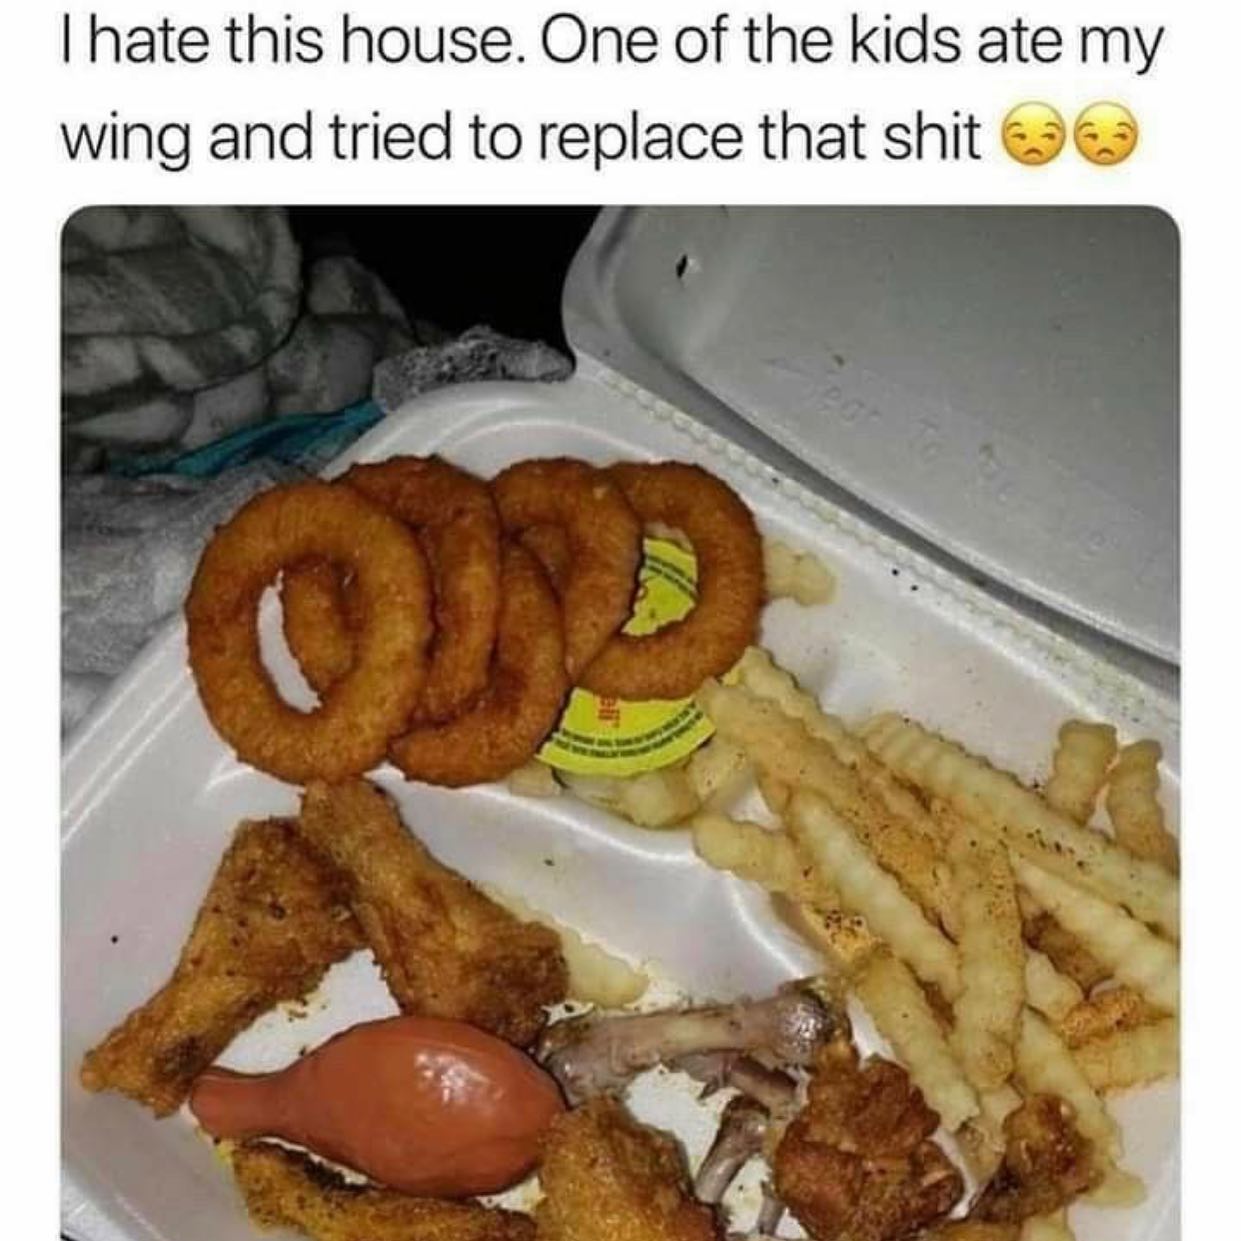 dank memes - hate this house one of the kids ate my wing meme - I hate this house. One of the kids ate my wing and tried to replace that shit On